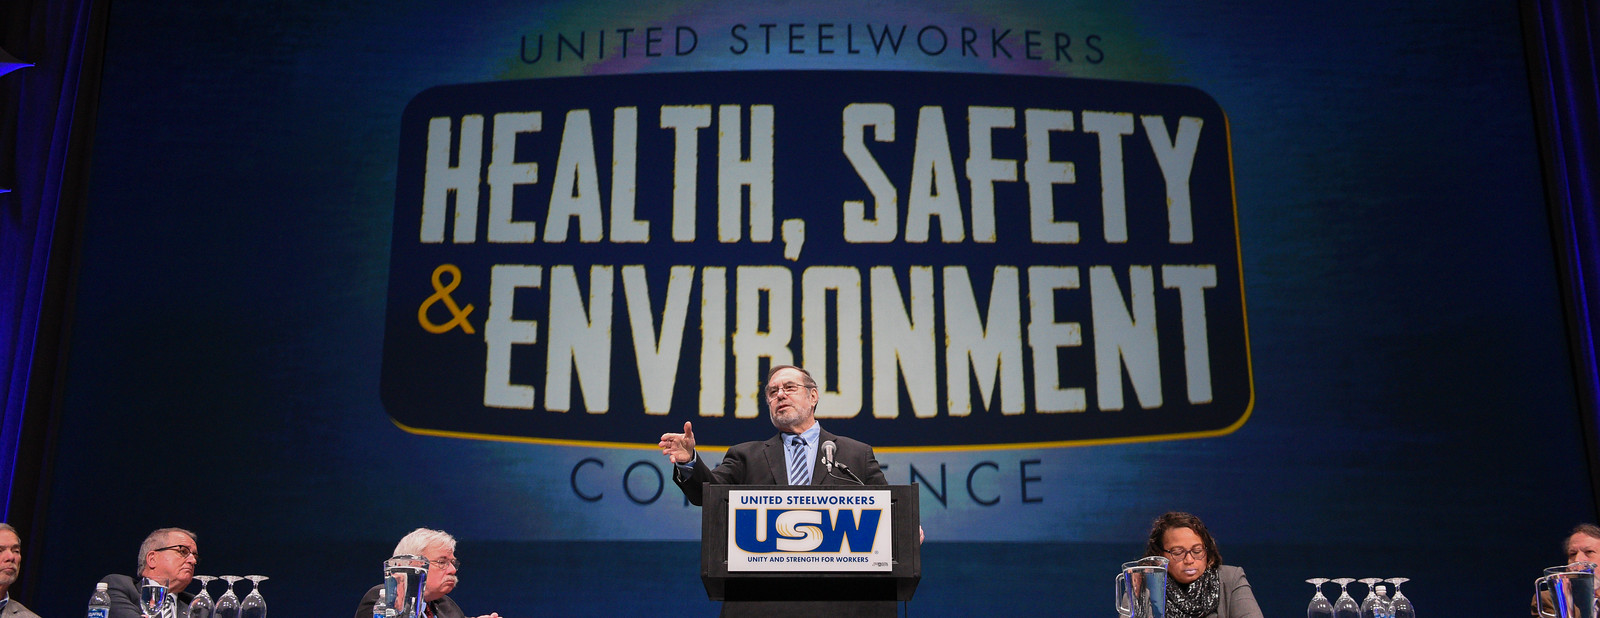 Workplace Safety Experts Address Delegates United Steelworkers